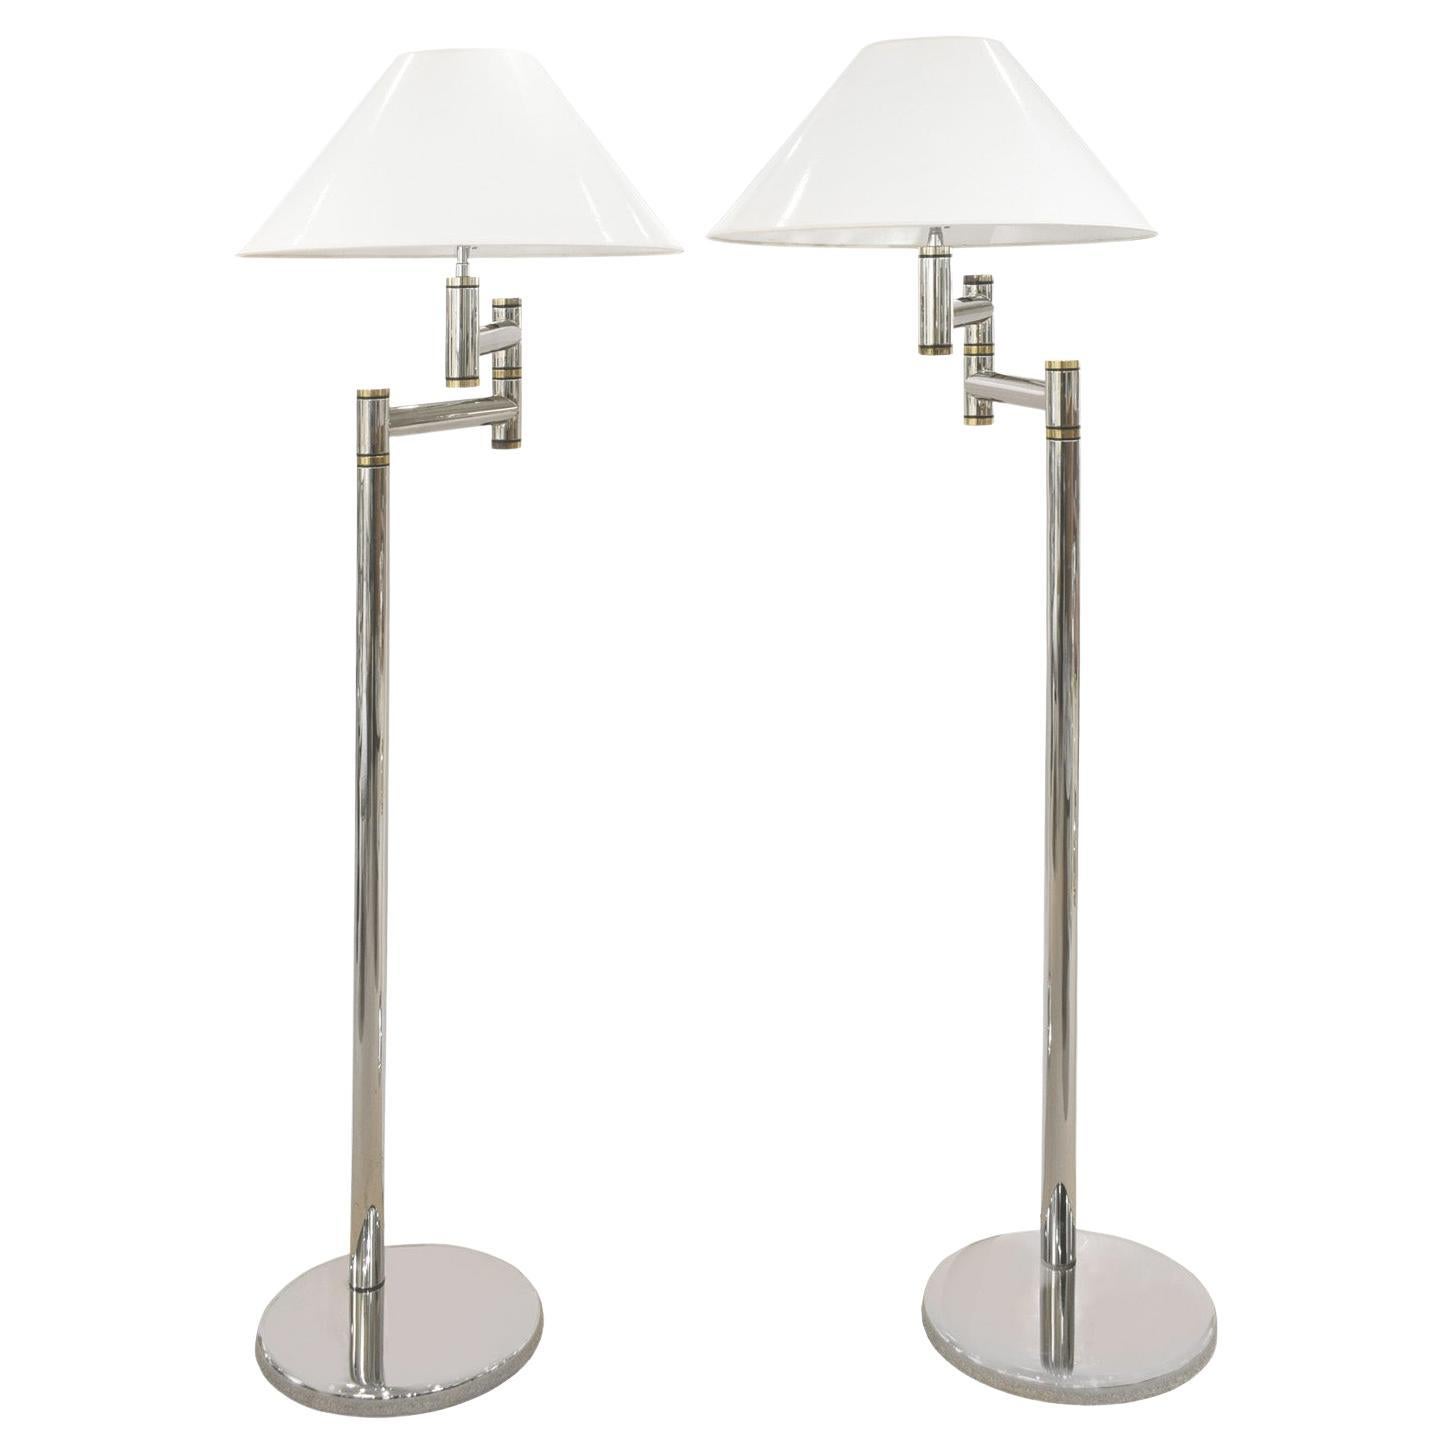 Karl Springer Pair of Exceptional Chrome and Brass Swing-Arm Floor Lamps 1980s For Sale